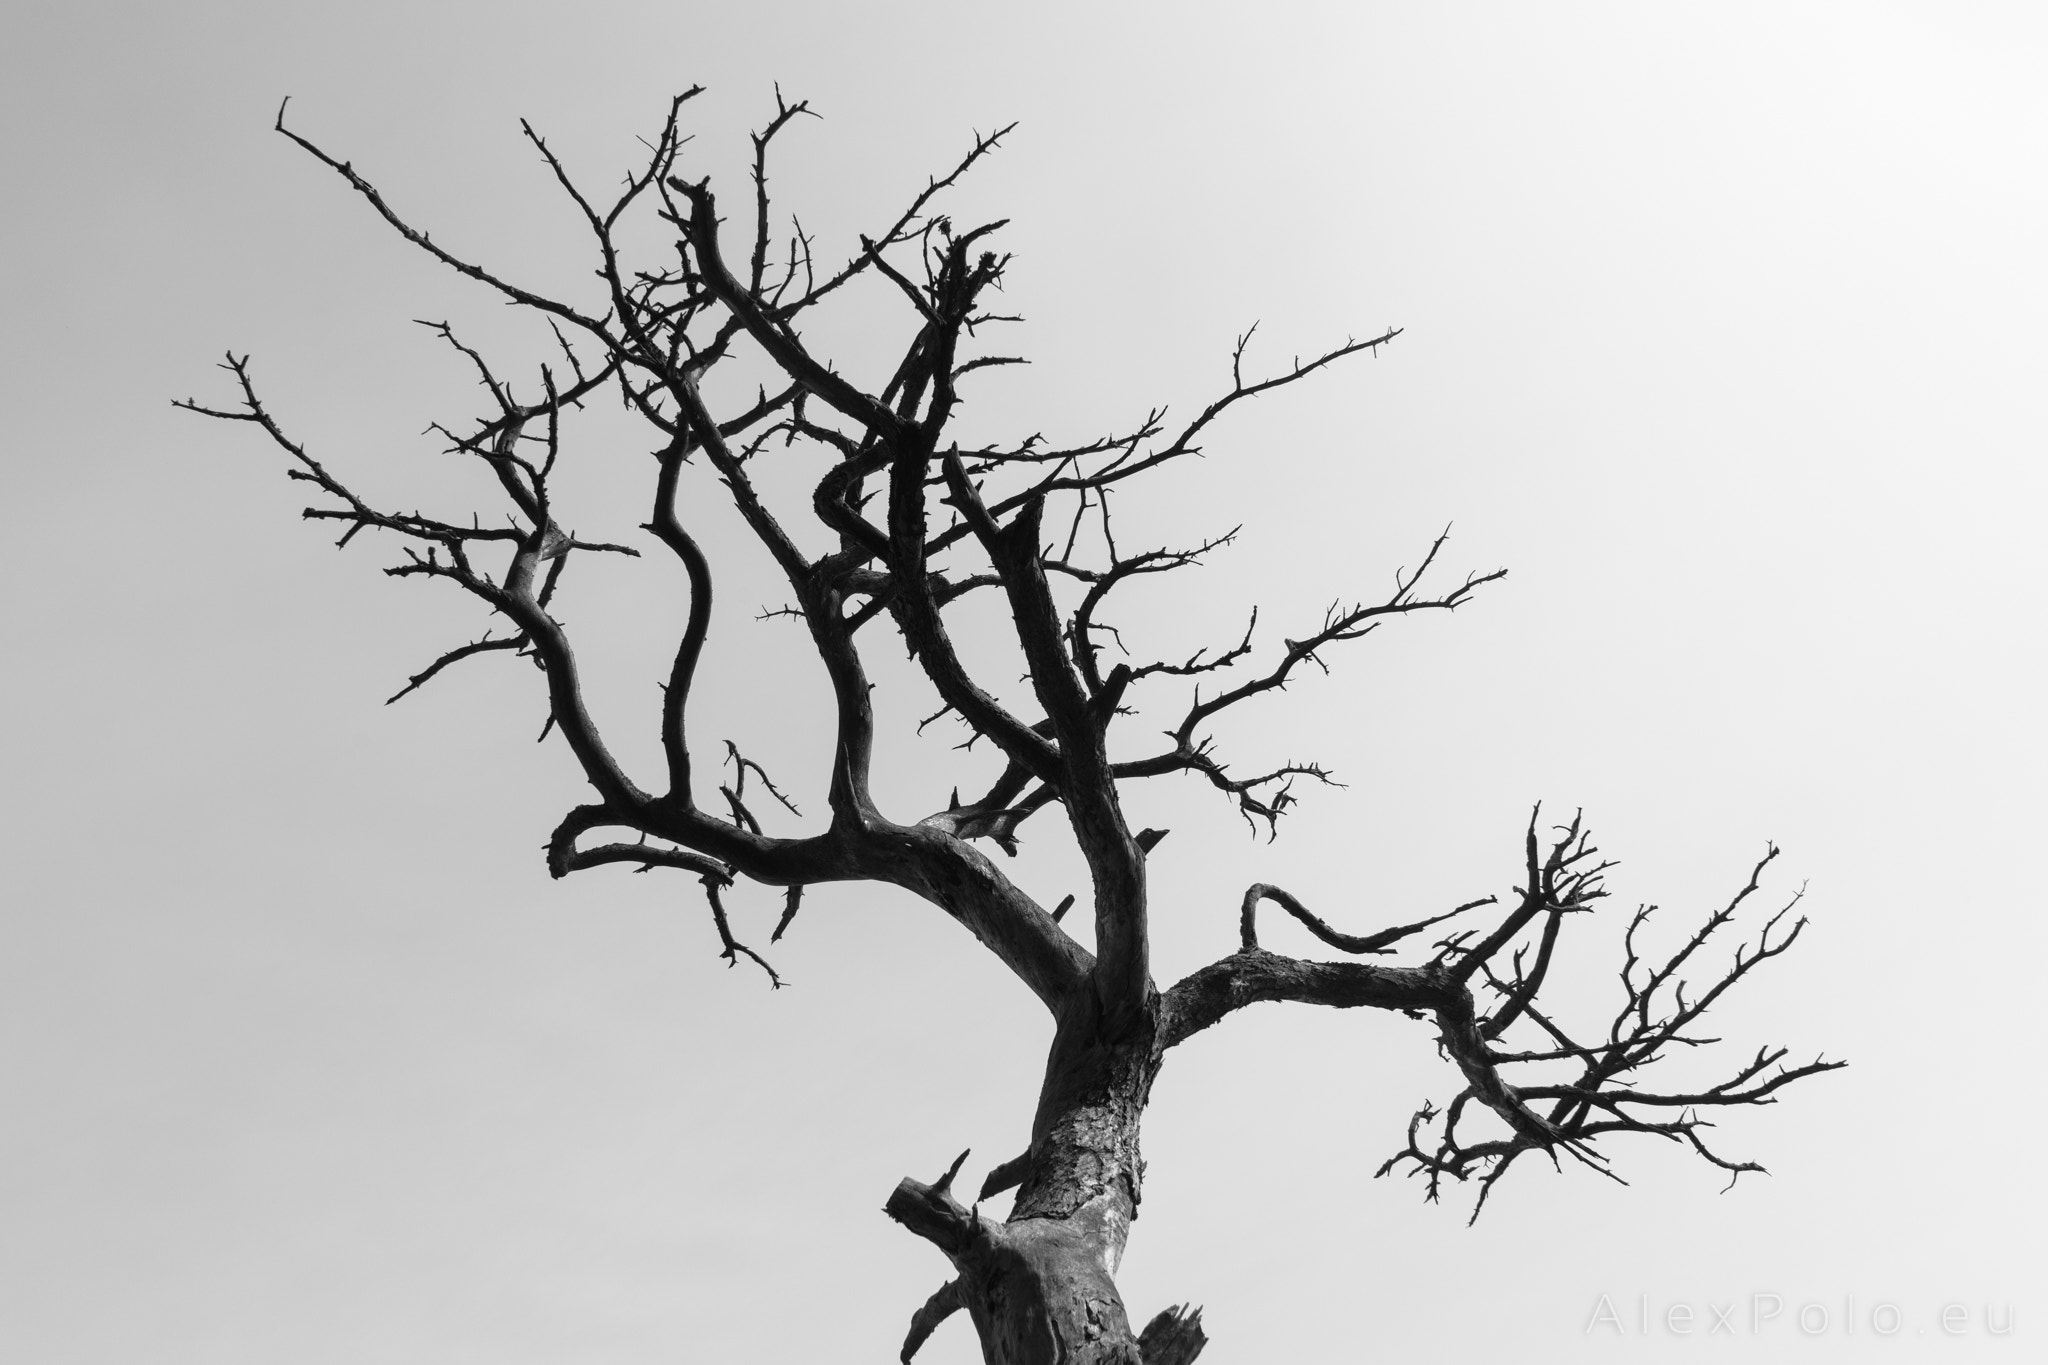 General 2048x1365 Alex Polo 500px trees monochrome dead trees minimalism simple background branch